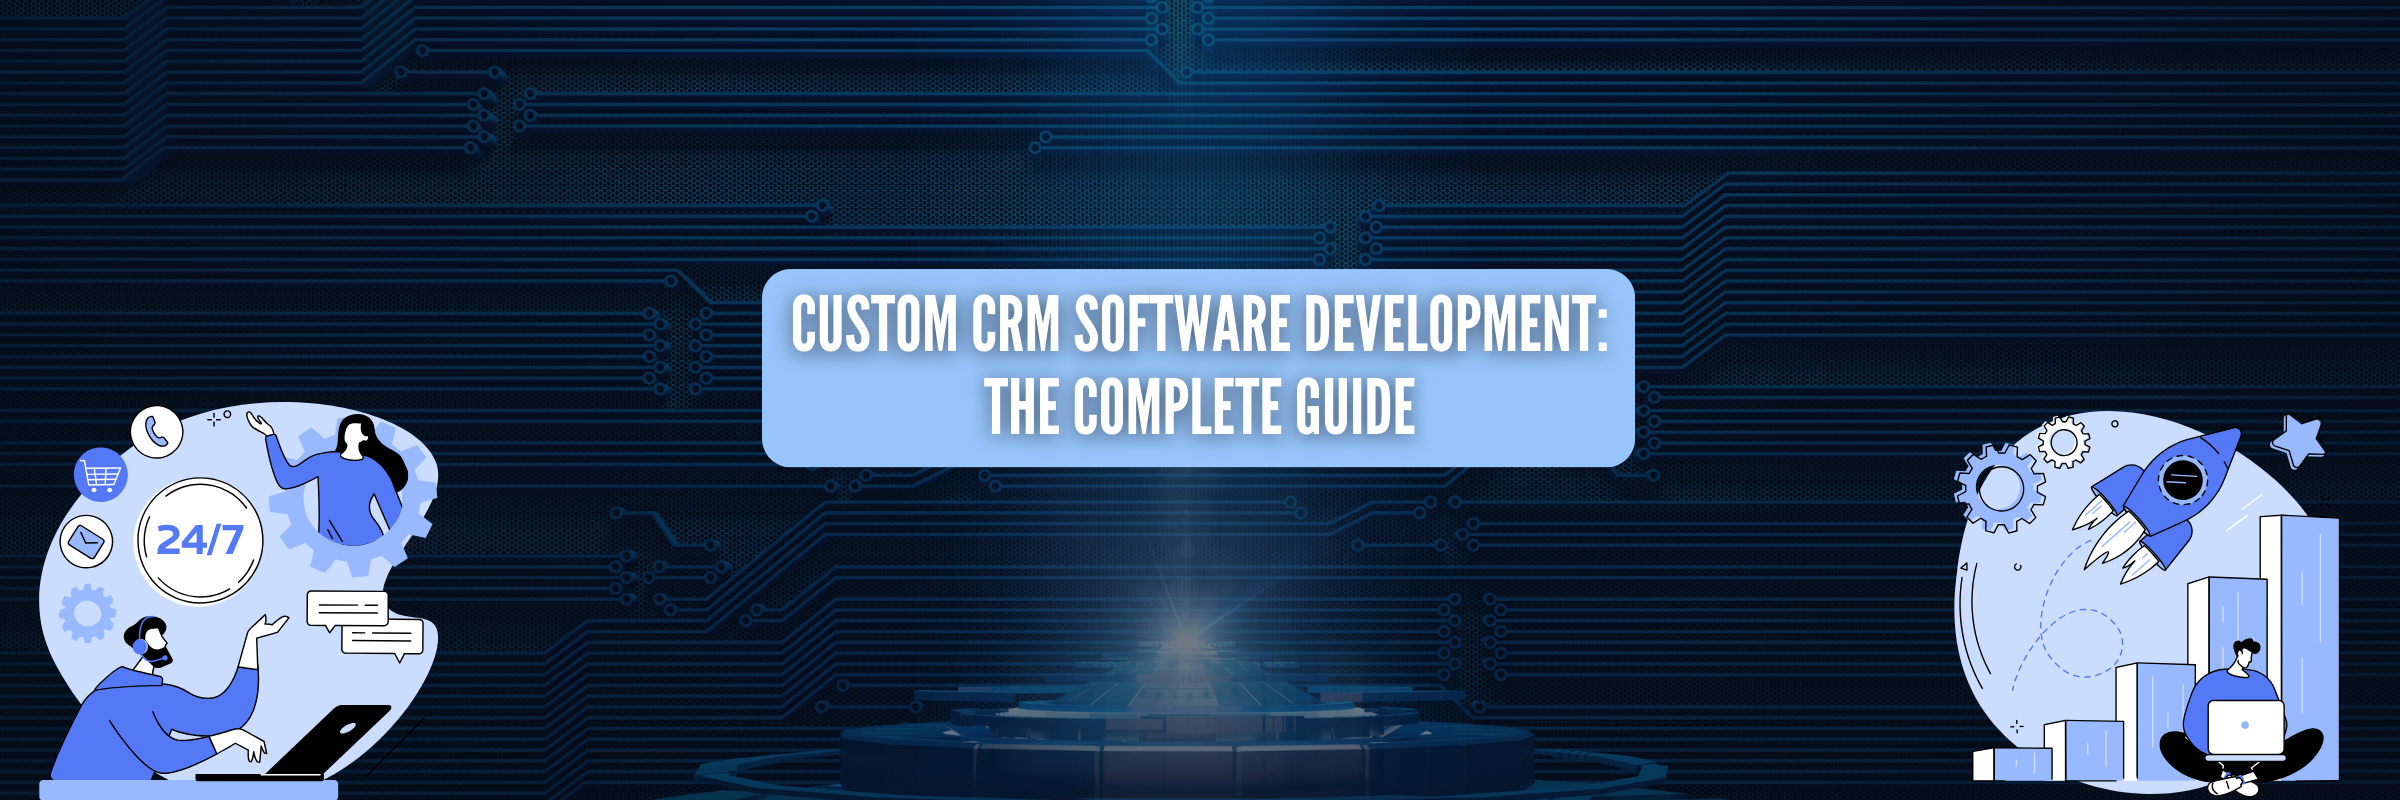 Custom CRM Software Development: The Complete Guide